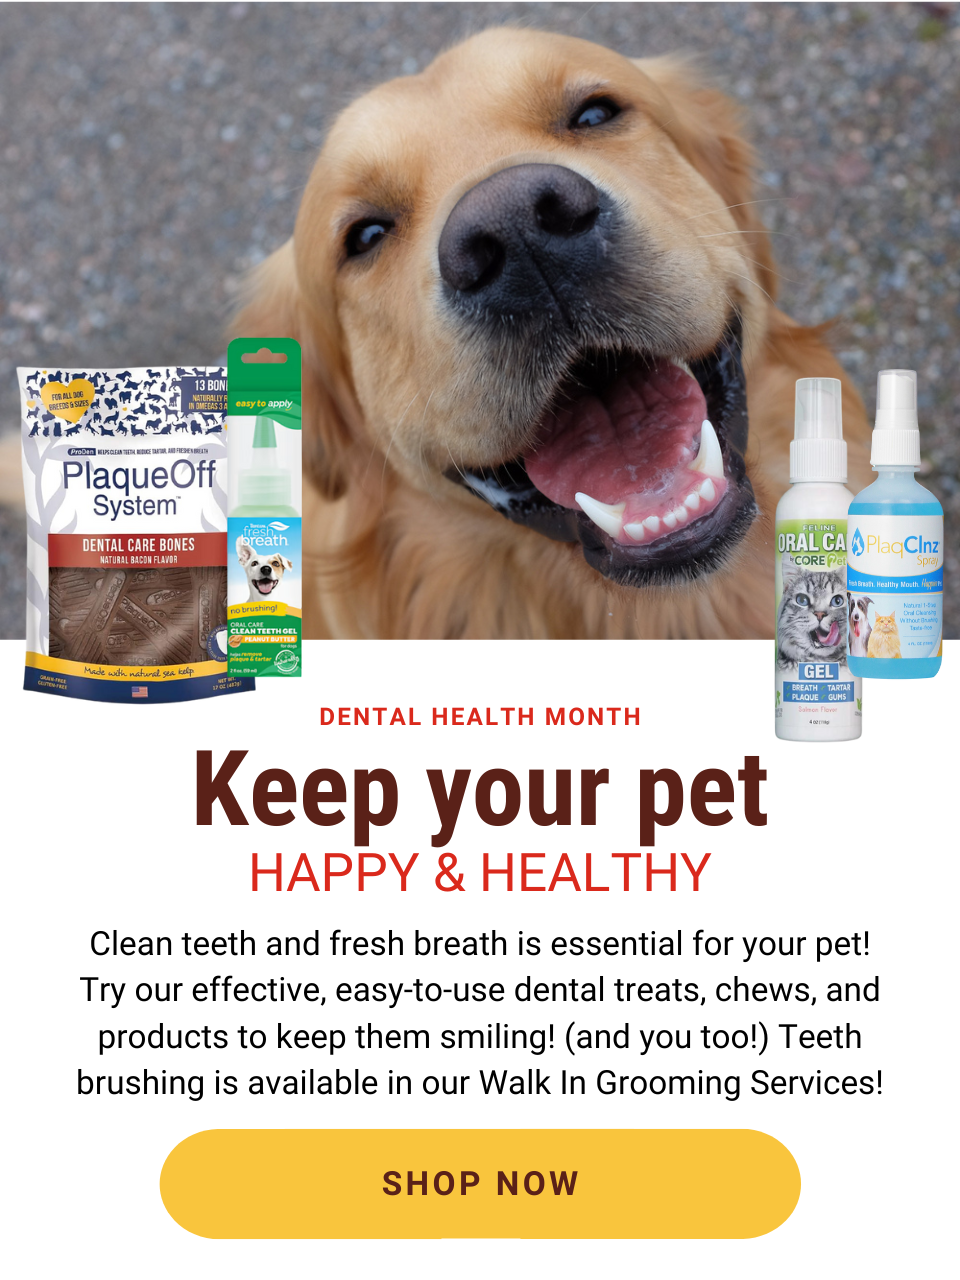 Clean teeth and fresh breath is essential for your pet! Try our effective, easy-to-use dental treats, chews, and products to keep them smiling! (and you too!) Shop Now!